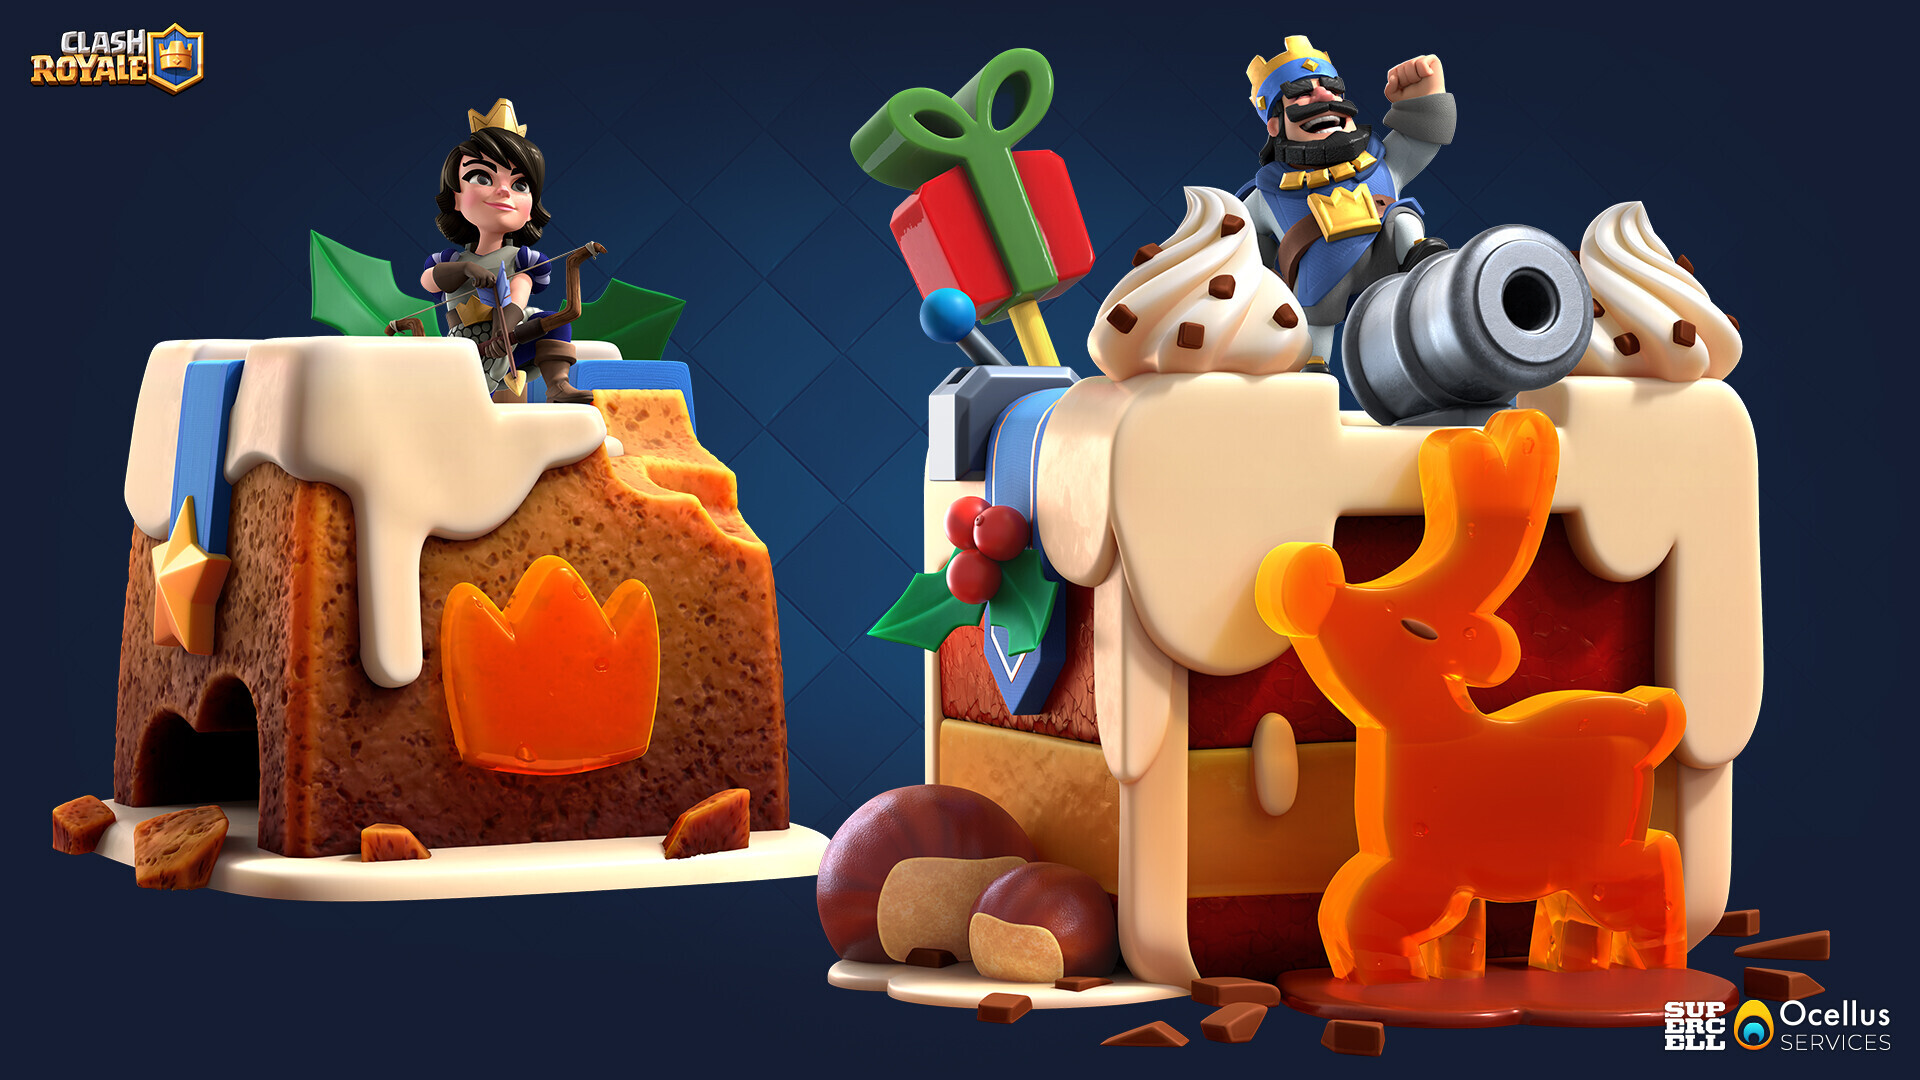 Clash Royale Victory Animation by Paul on Dribbble